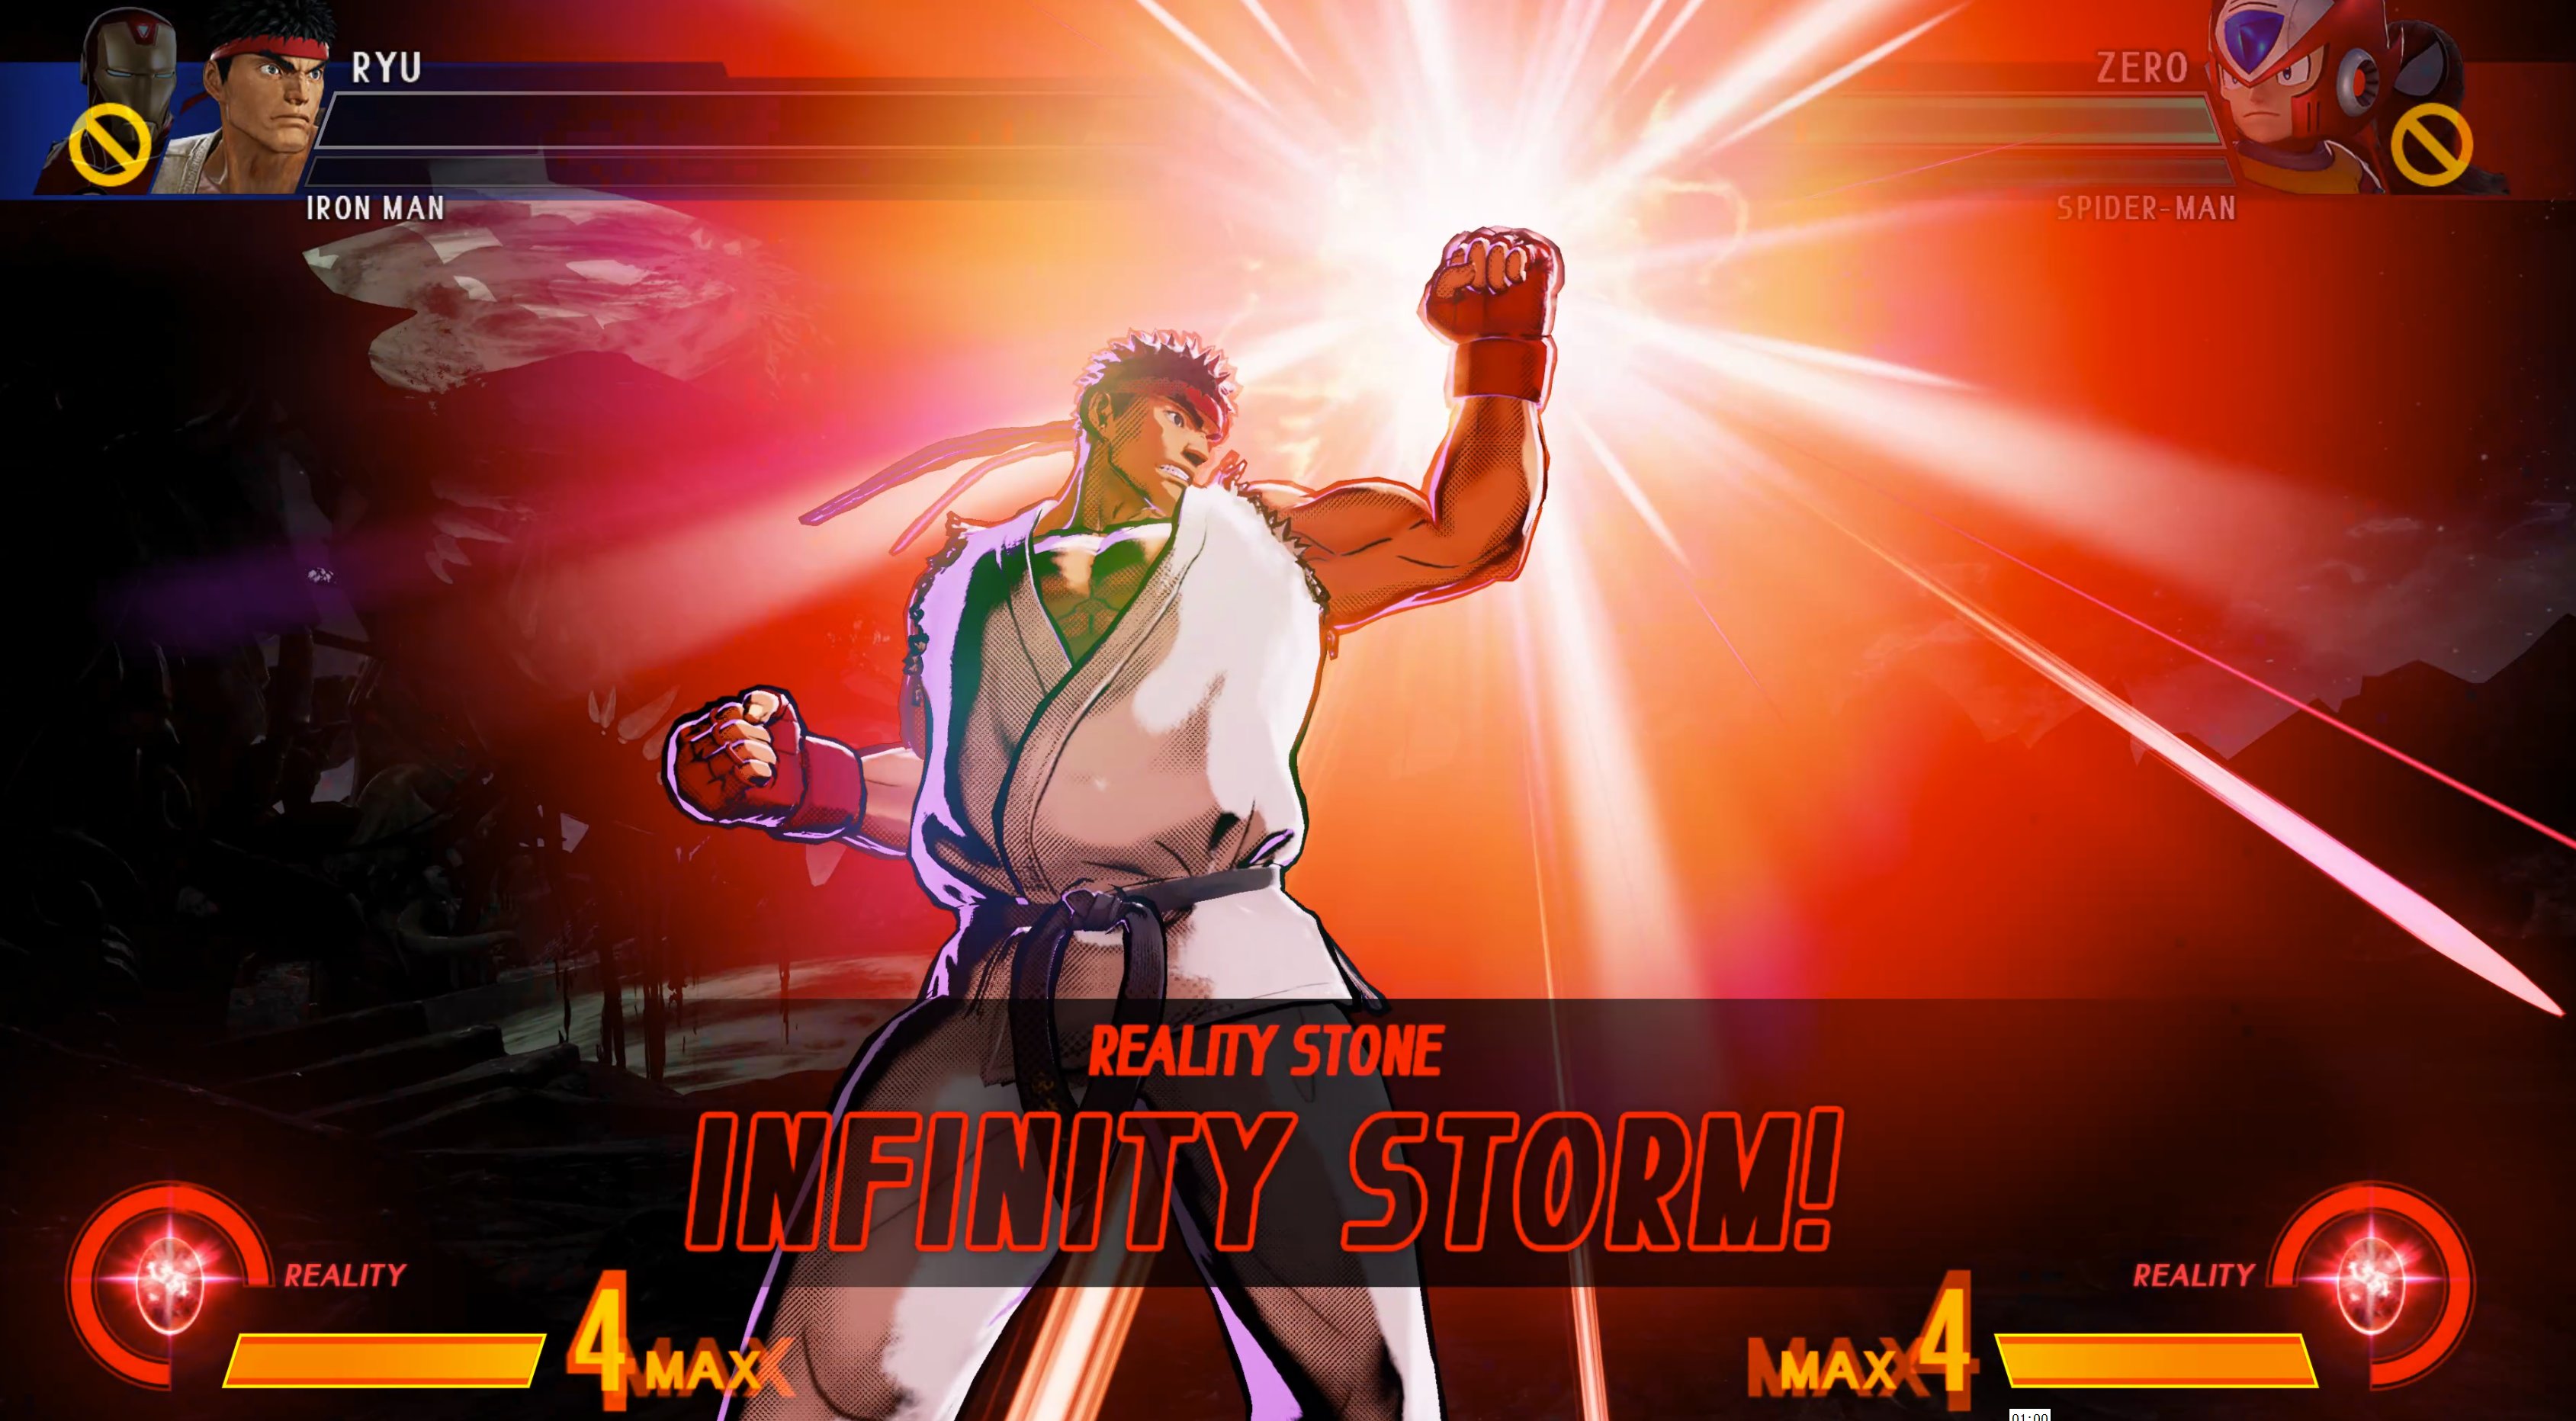 Modded Ryu from MVCI strikes a post, his fist glowing in victorious light.